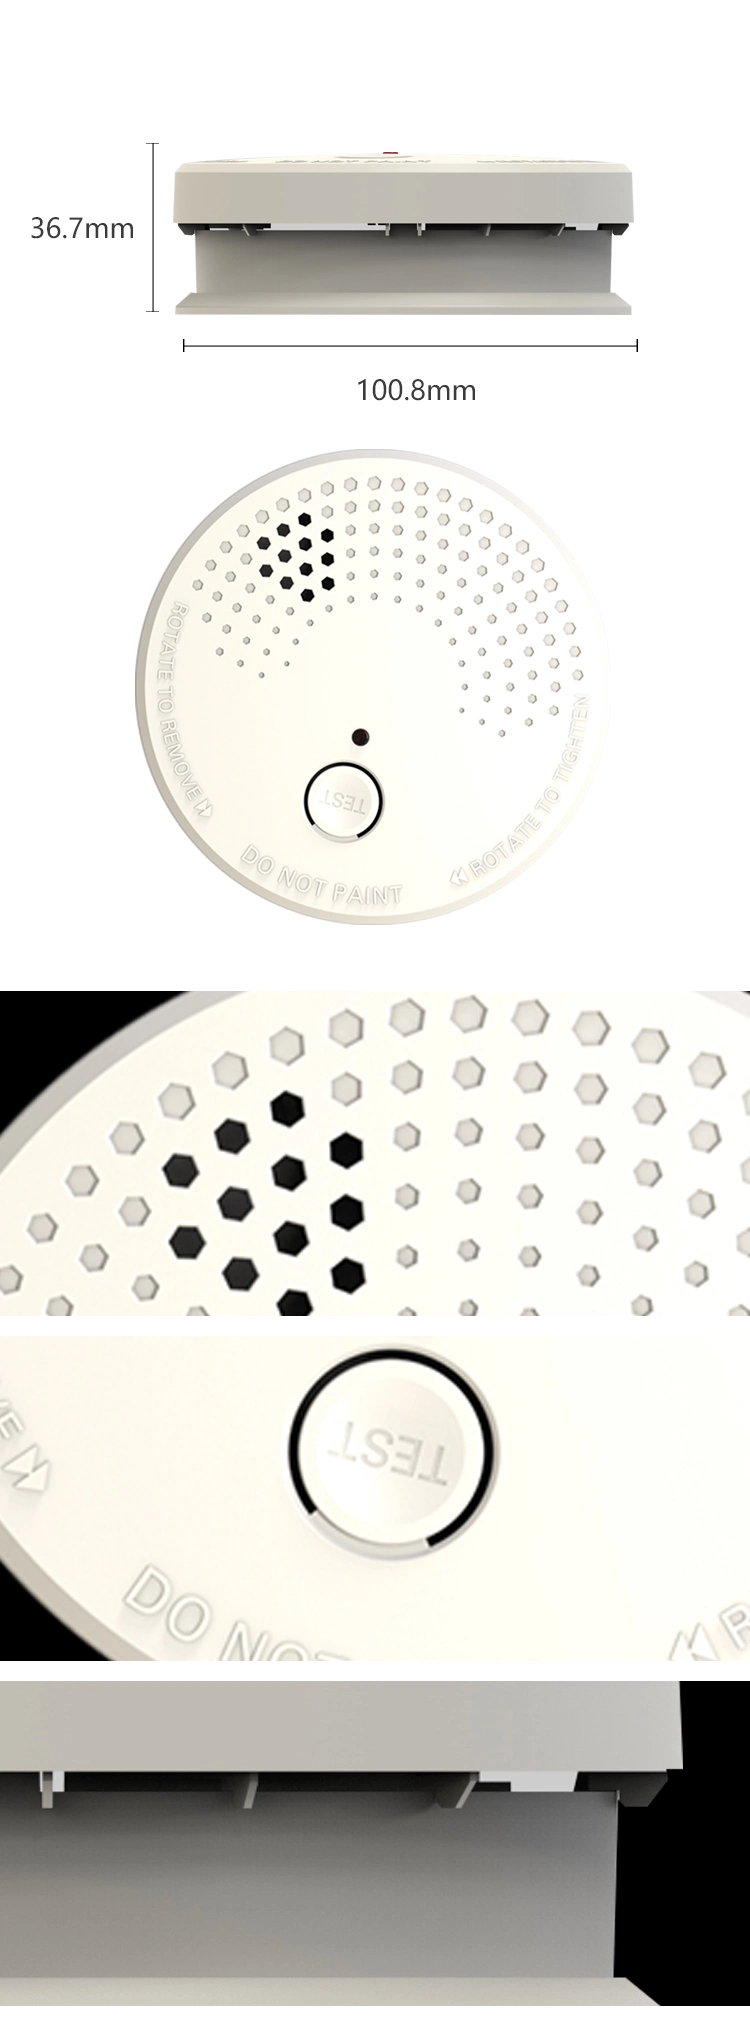 Jbe Fire Detector Home Fire Alarm